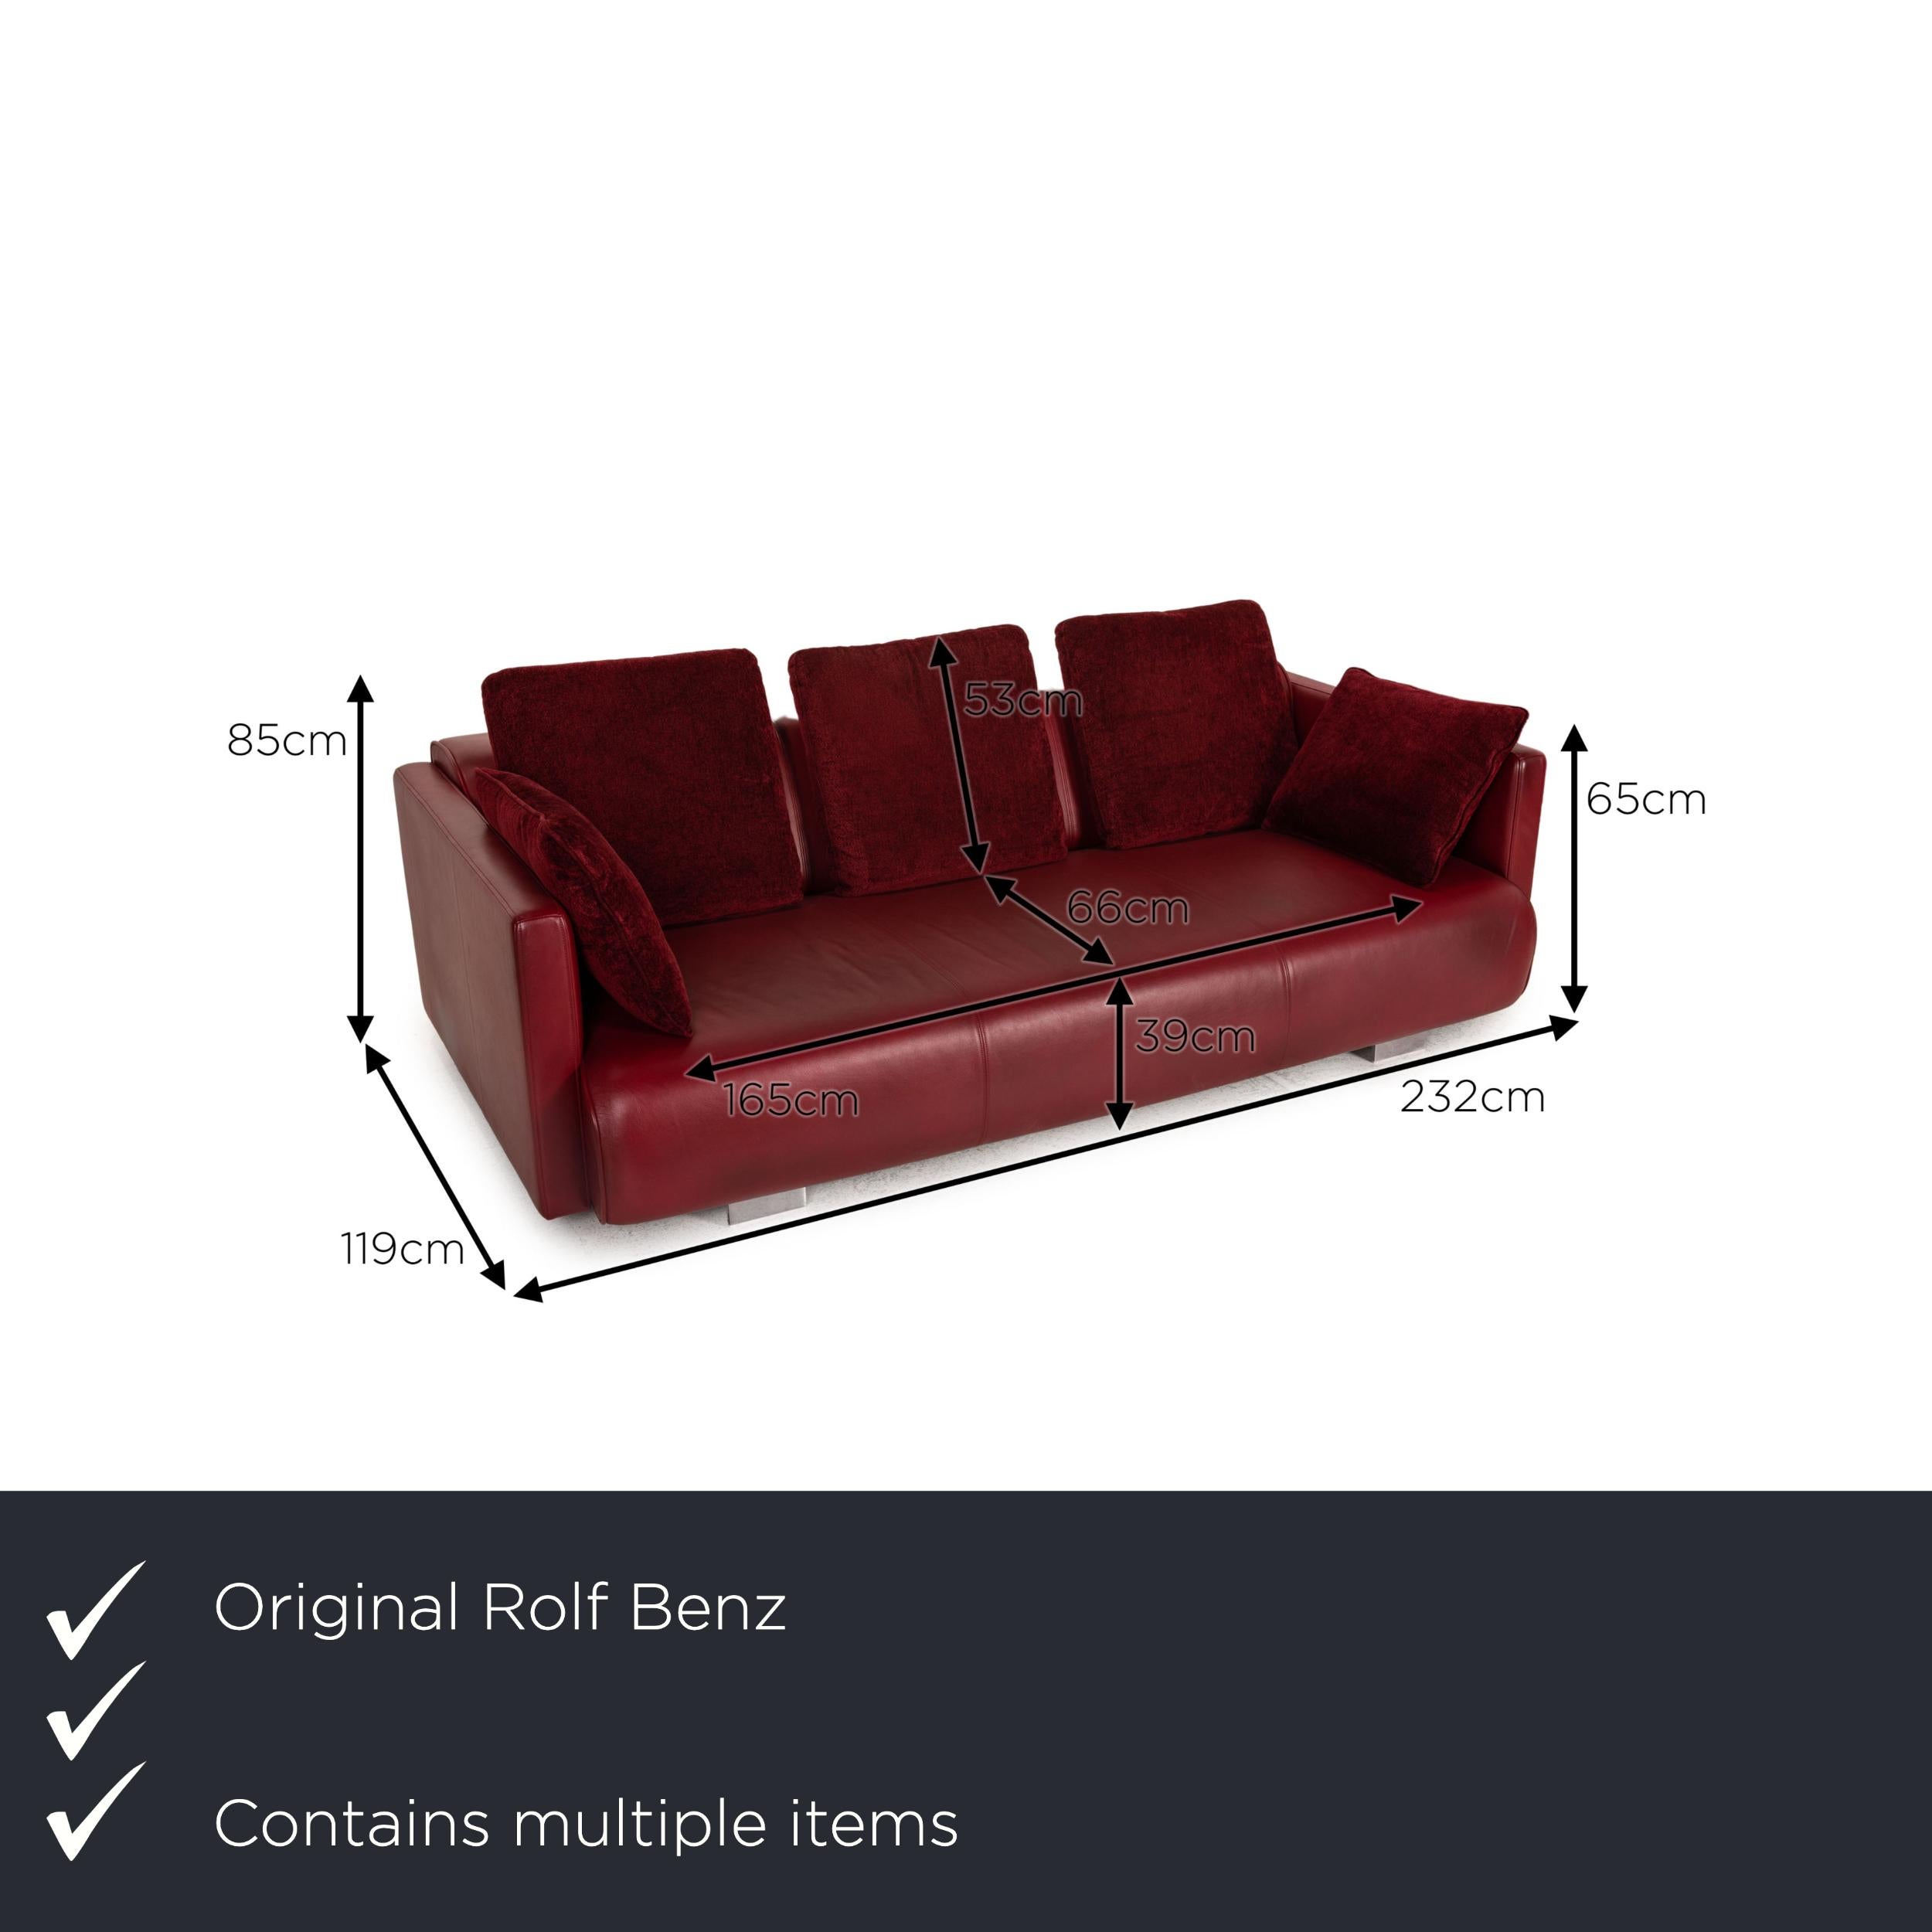 We present to you a Rolf Benz 6300 leather sofa set red three-seater stool.

Product measurements in centimeters:

Measures: depth: 119
width: 232
height: 85
seat height: 39
rest height: 65
seat depth: 66
seat width: 165
back height: